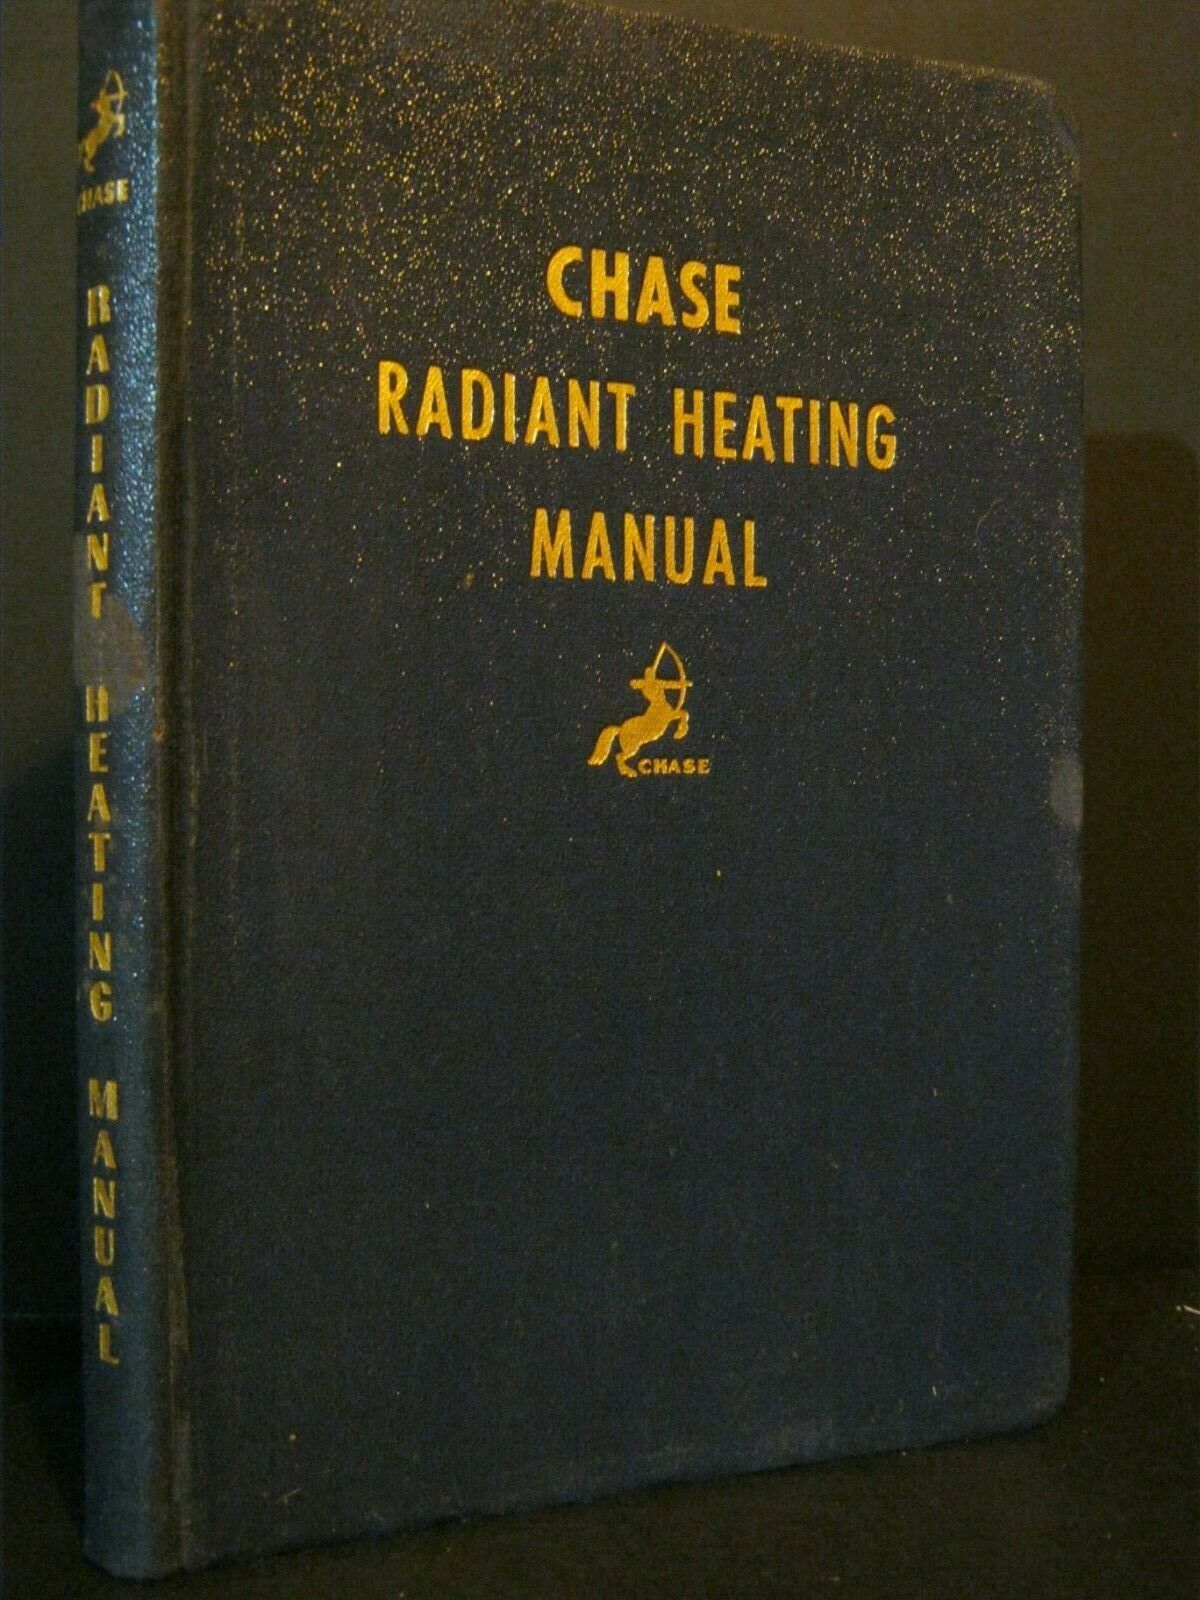 Antique - Chase Radiant Heating Manual - 1947